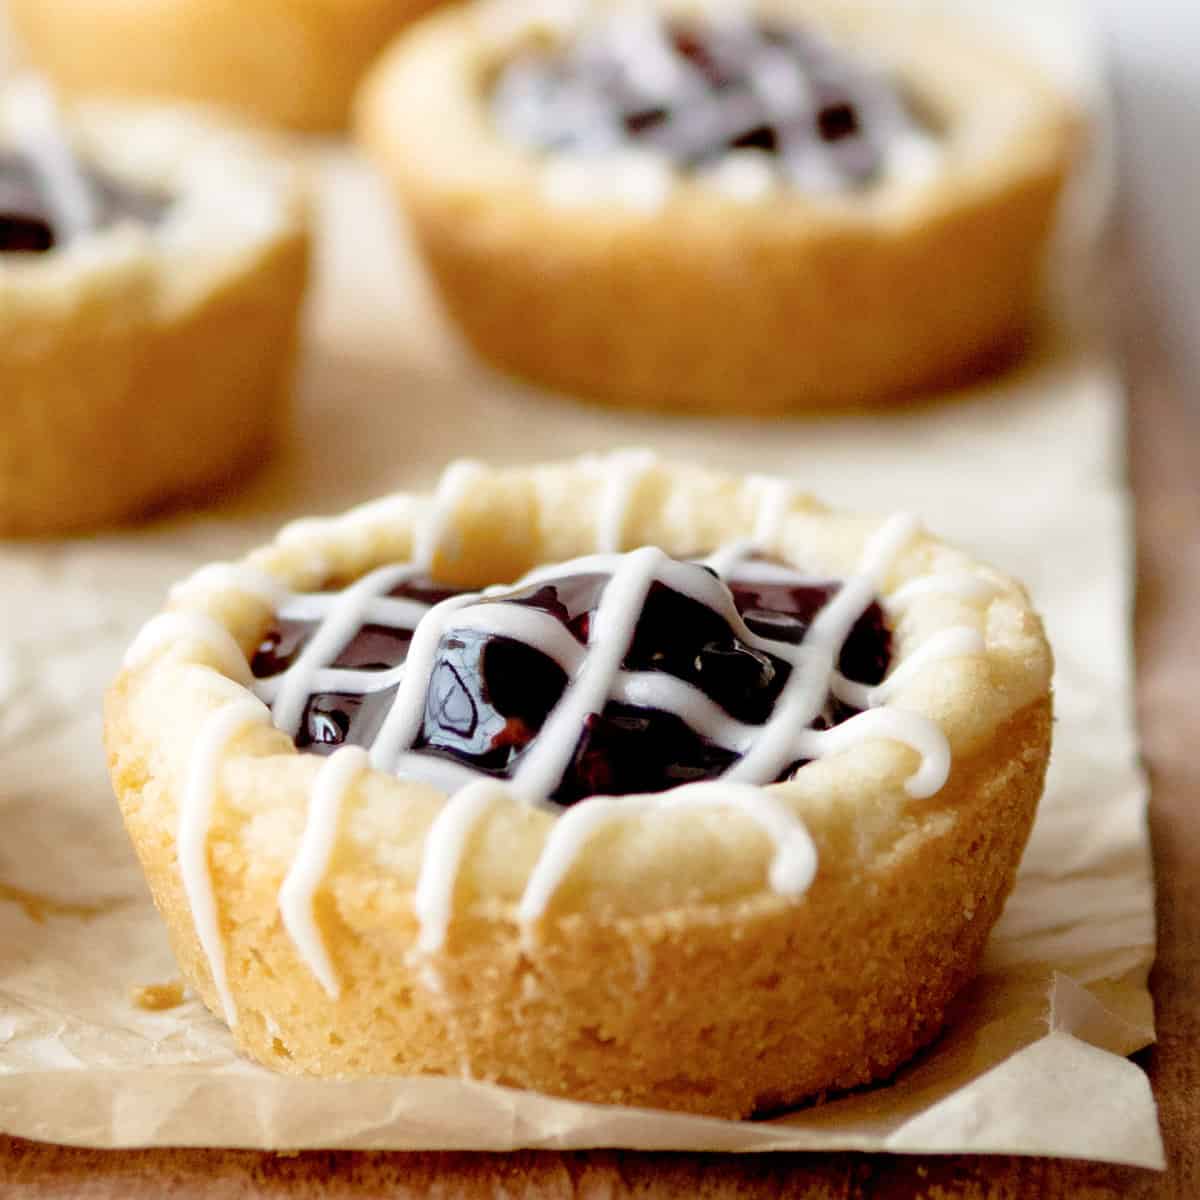 Berry Cookie Cups